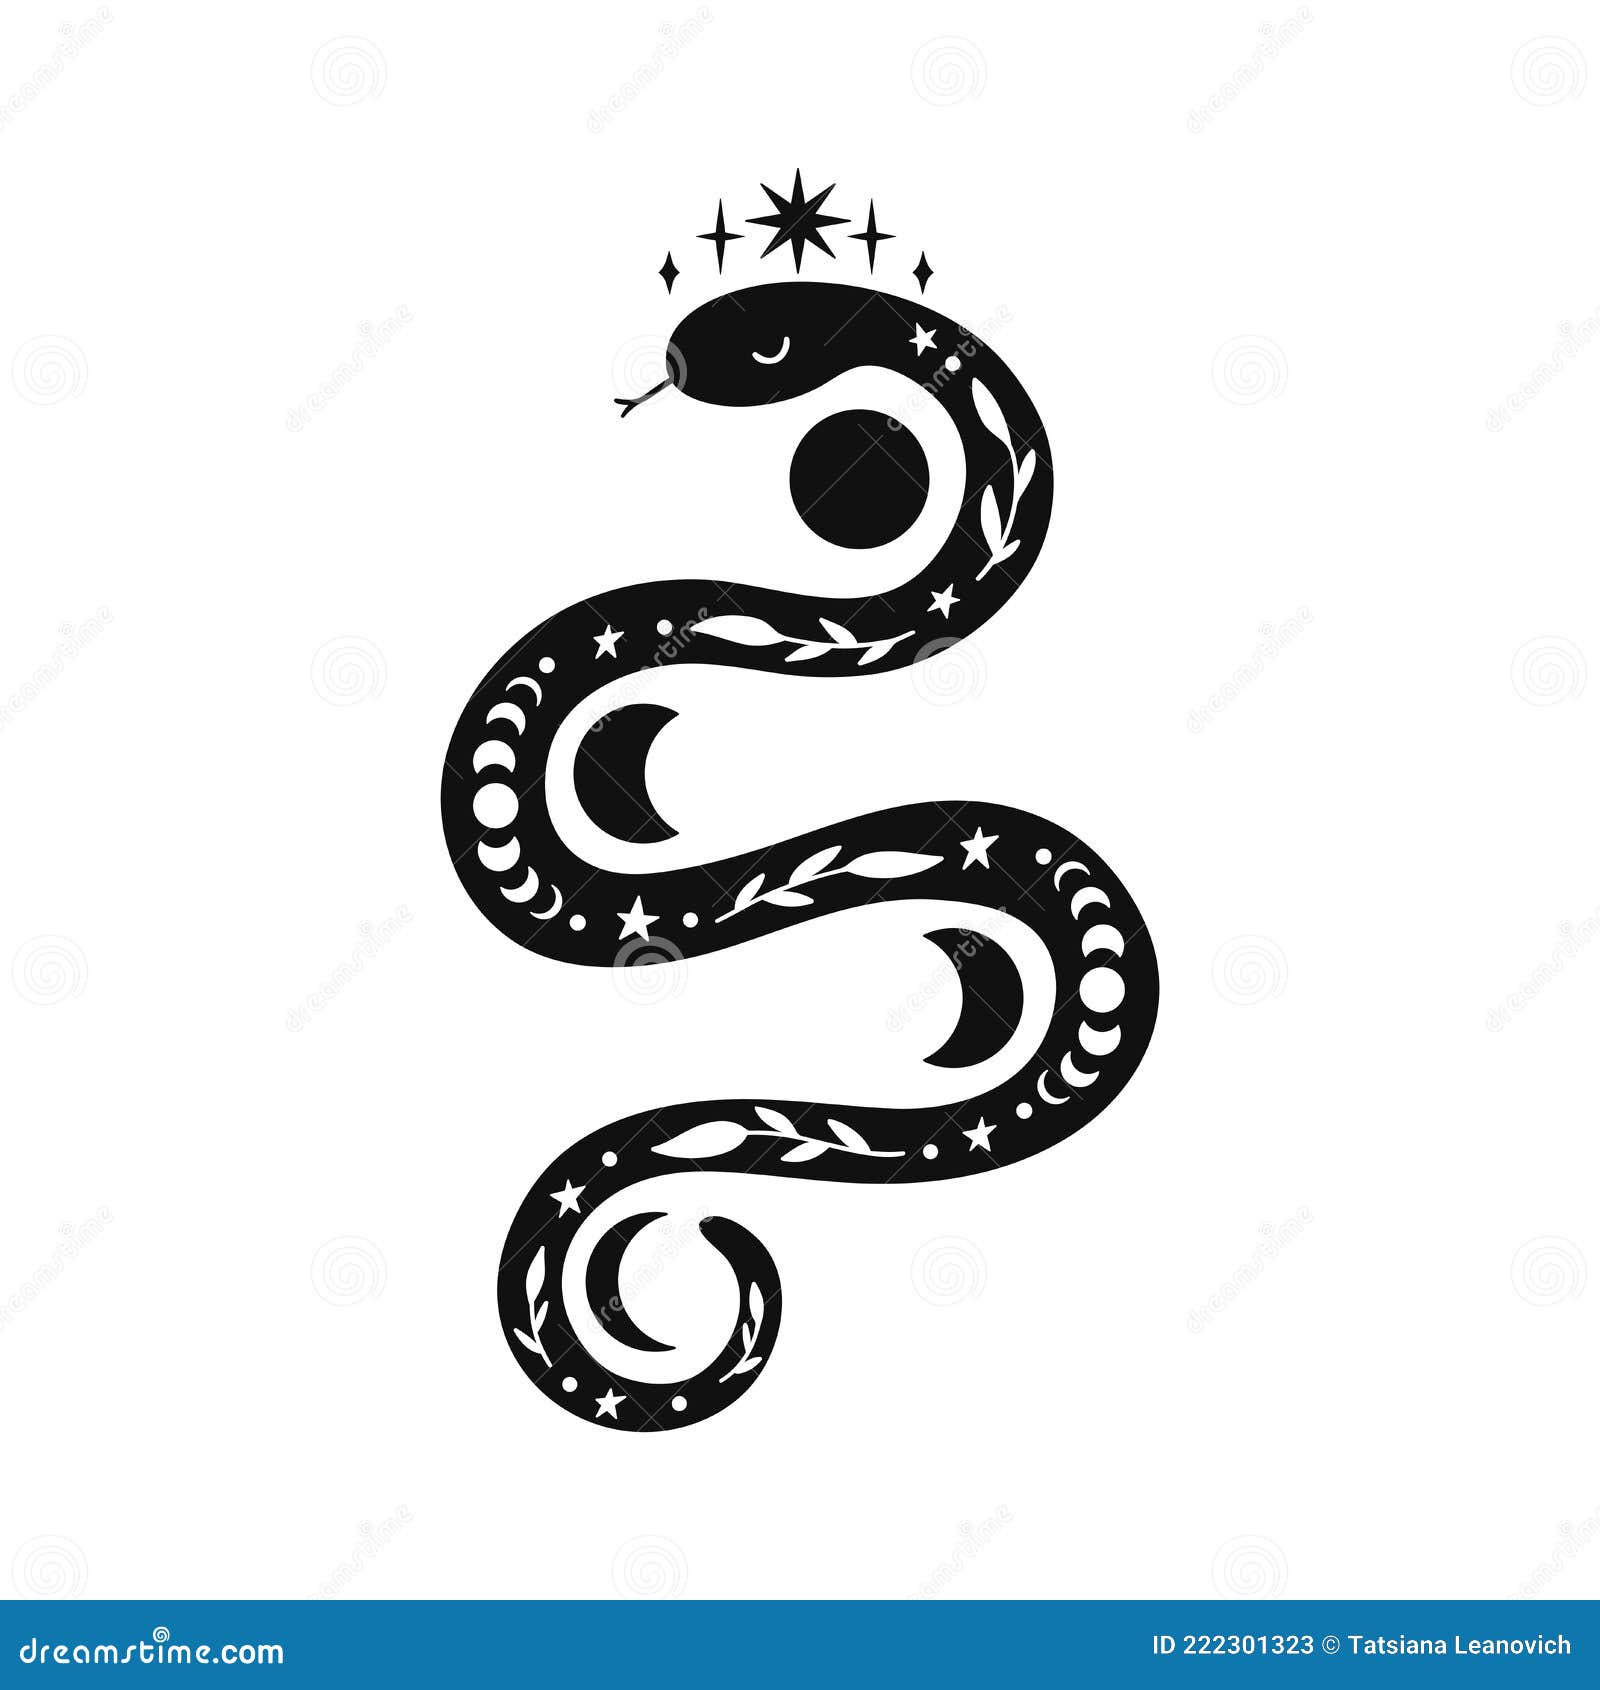 90 Snake And Sword Tattoo Backgrounds Illustrations RoyaltyFree Vector  Graphics  Clip Art  iStock